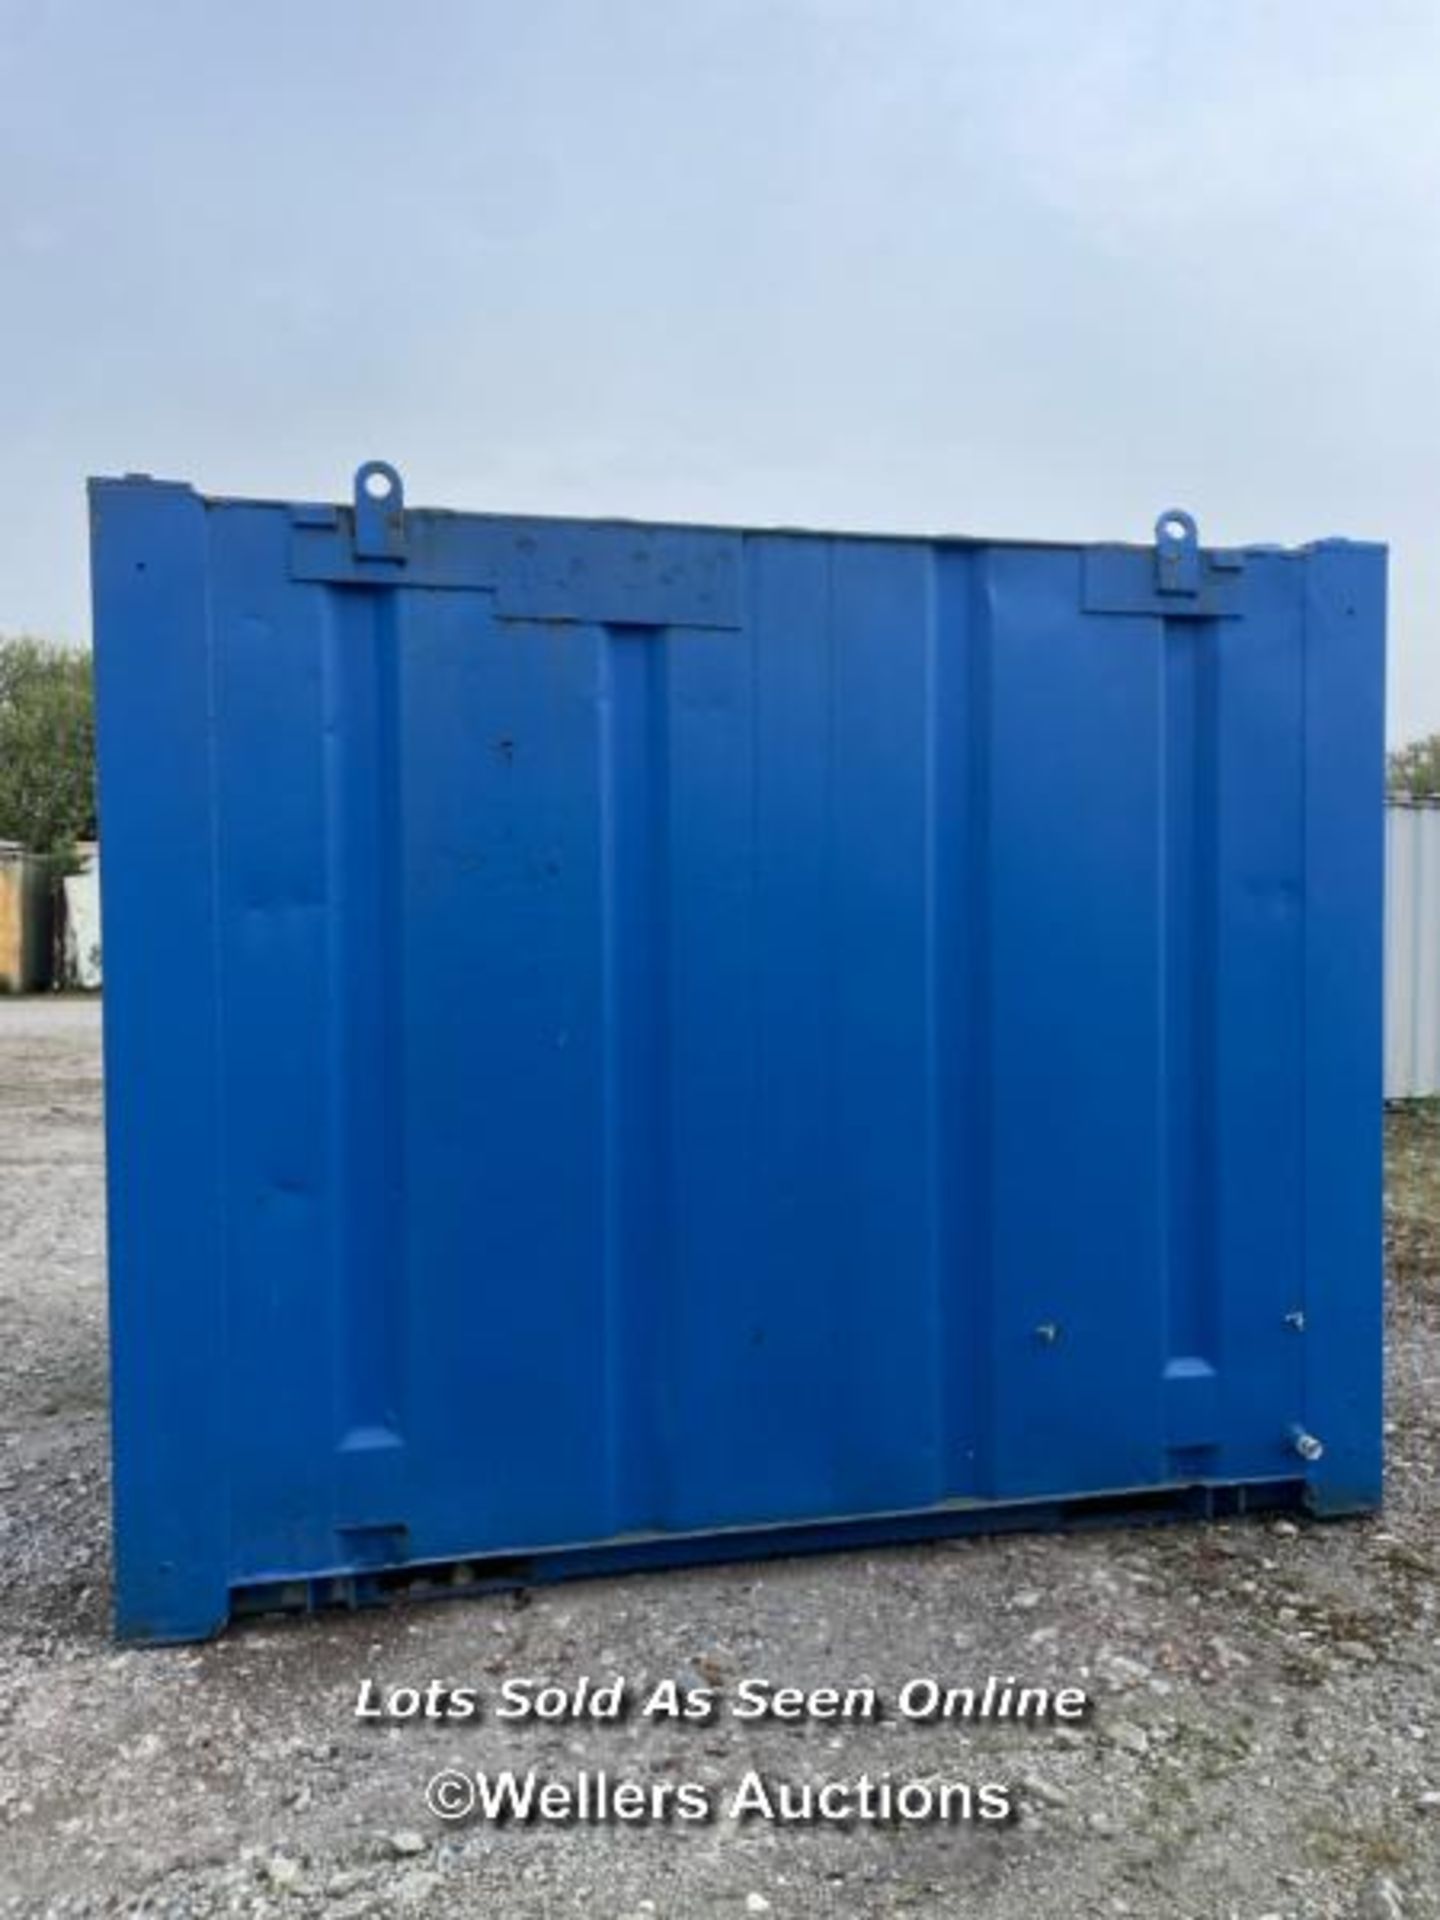 10' X 8' PORTABLE STEEL SHOWER BLOCK, UNIT INCLUDES HYCO EXTRACTION FAN, ELECTRICAL SWITCHBOARD, - Image 4 of 16